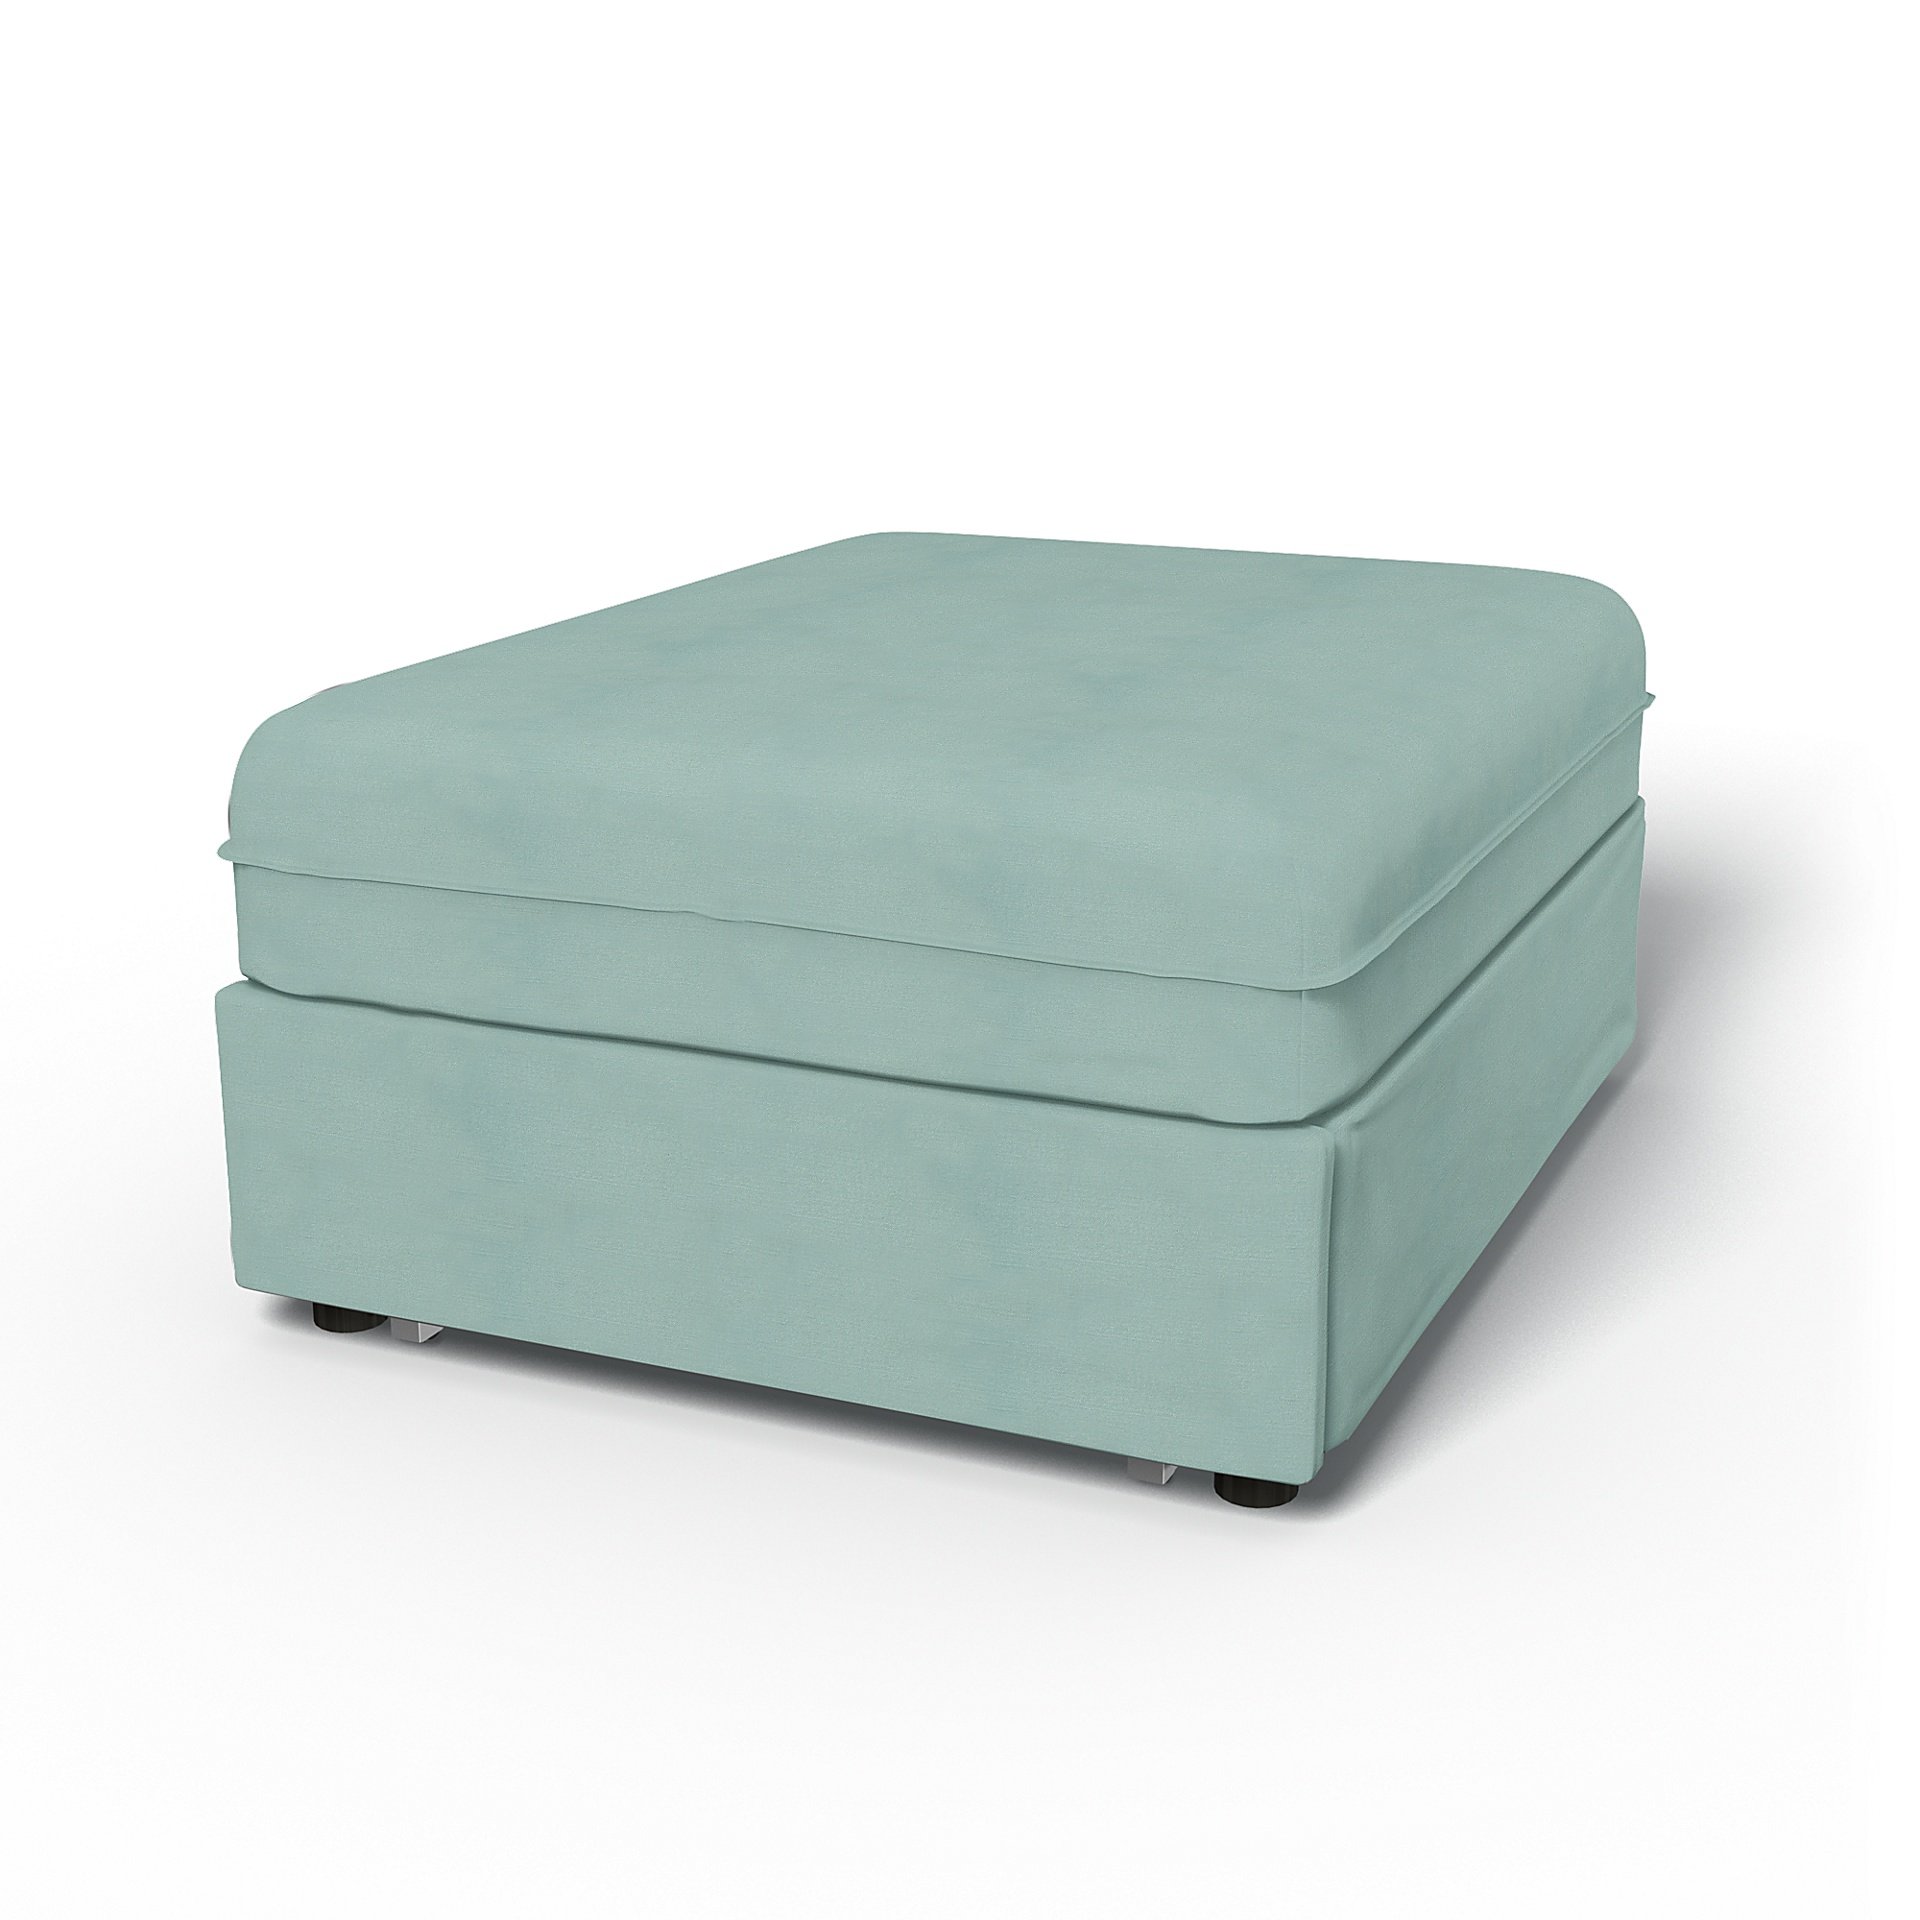 IKEA - Vallentuna Seat Module with Sofa Bed Cover 80x100cm 32x39in, Mineral Blue, Linen - Bemz